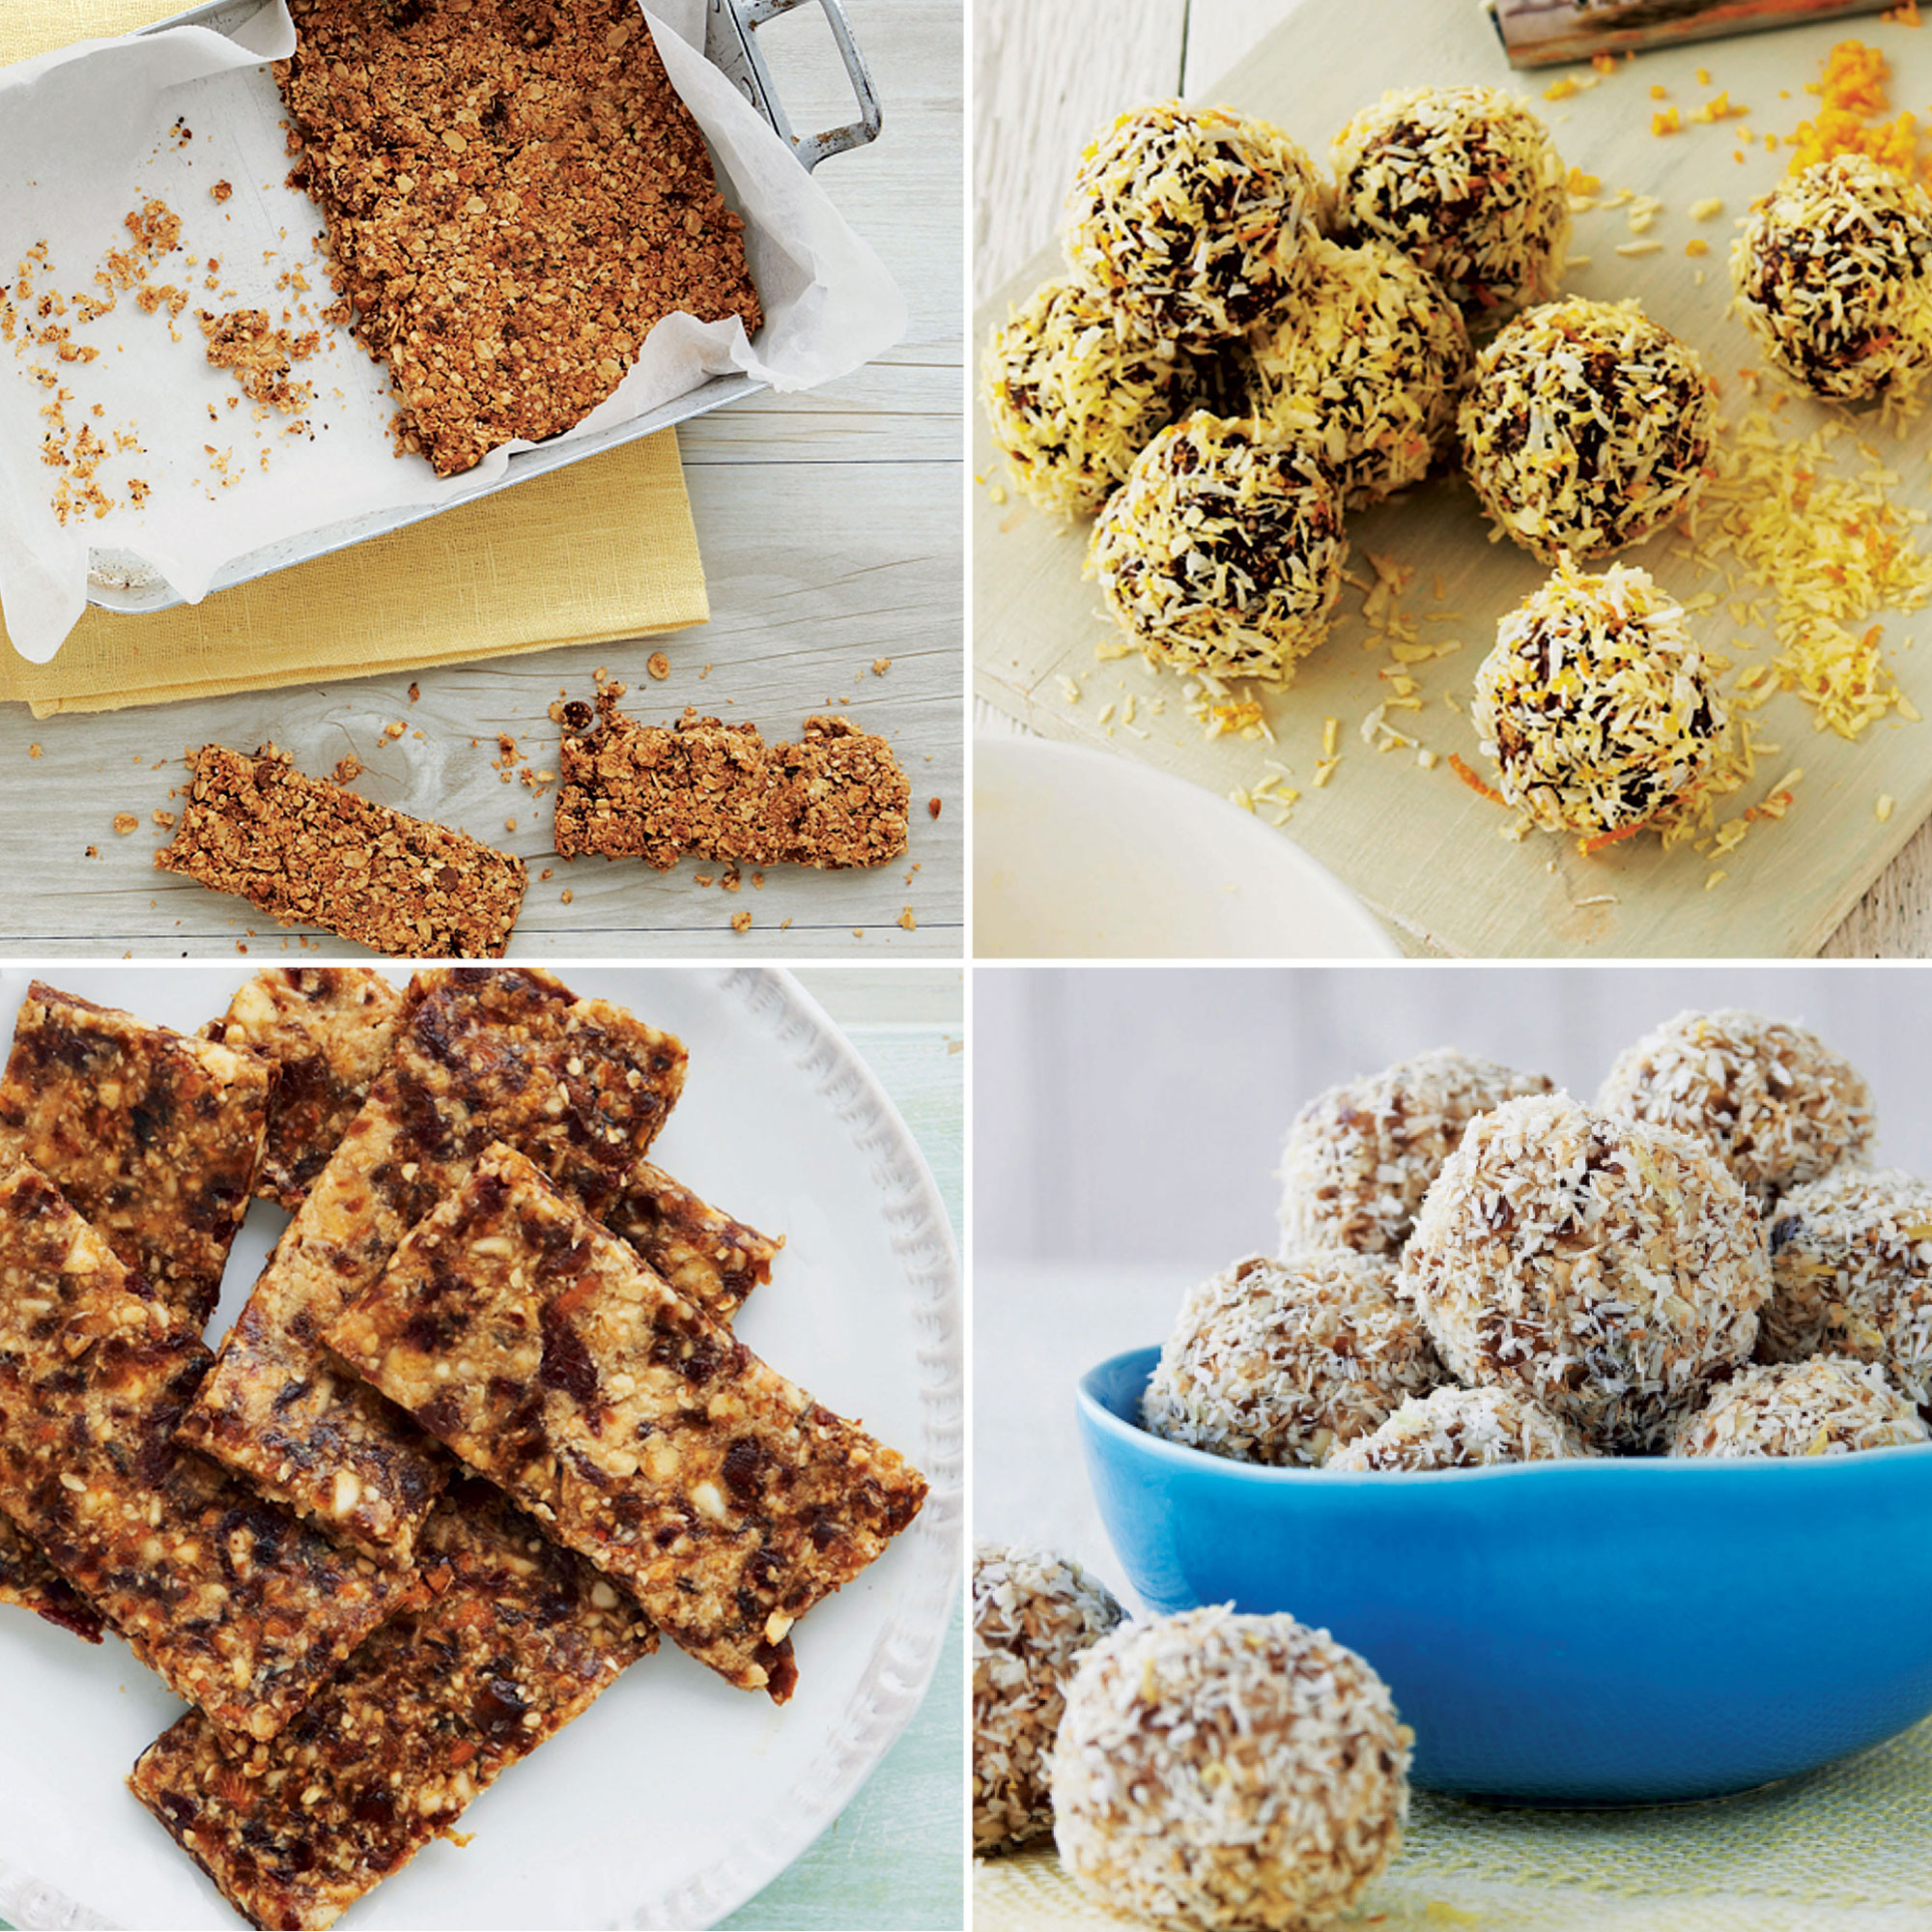 Recipes For Snacks
 5 Superfood Snack Recipes You Can Make at Home Health